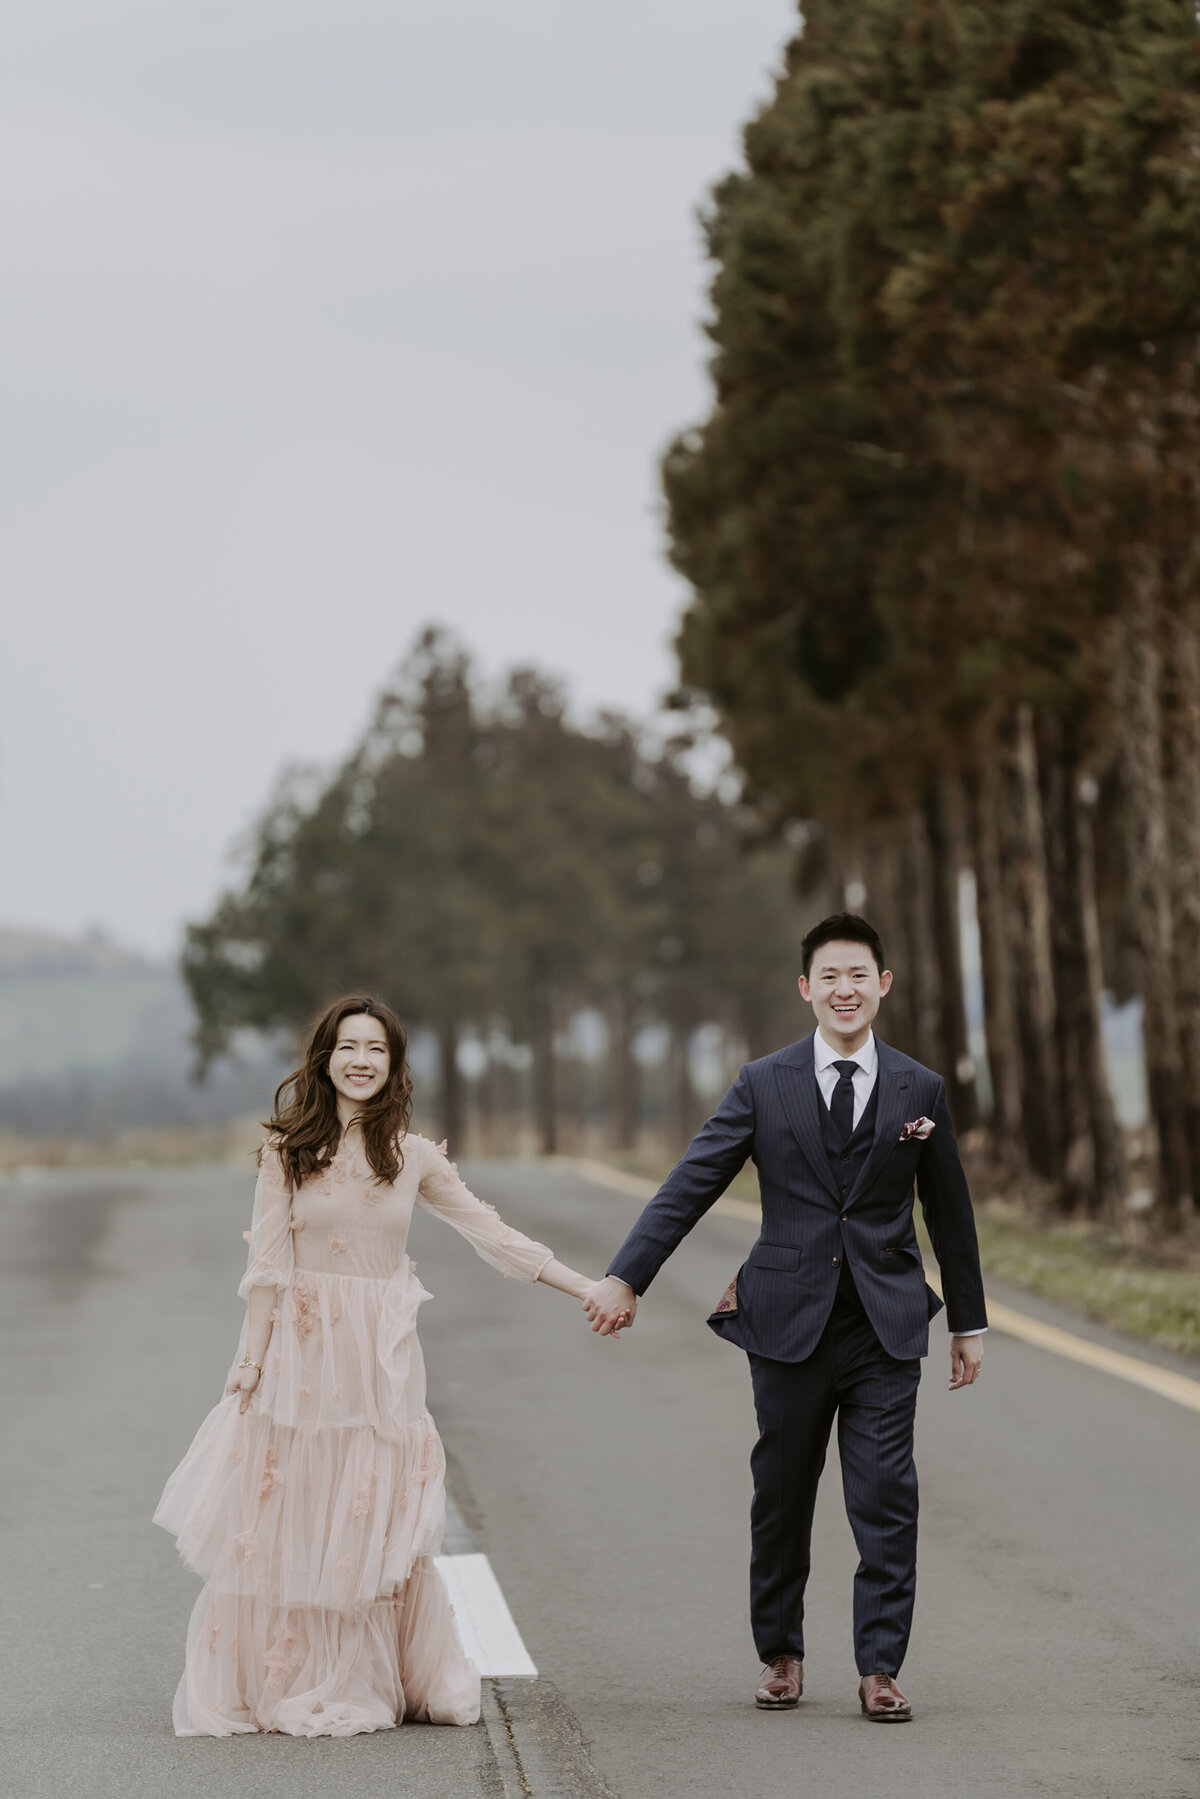 the bride wearing a raffled pink dress while the groom is wearing a black suit and tie while standing and holding hands in the road of jeju island